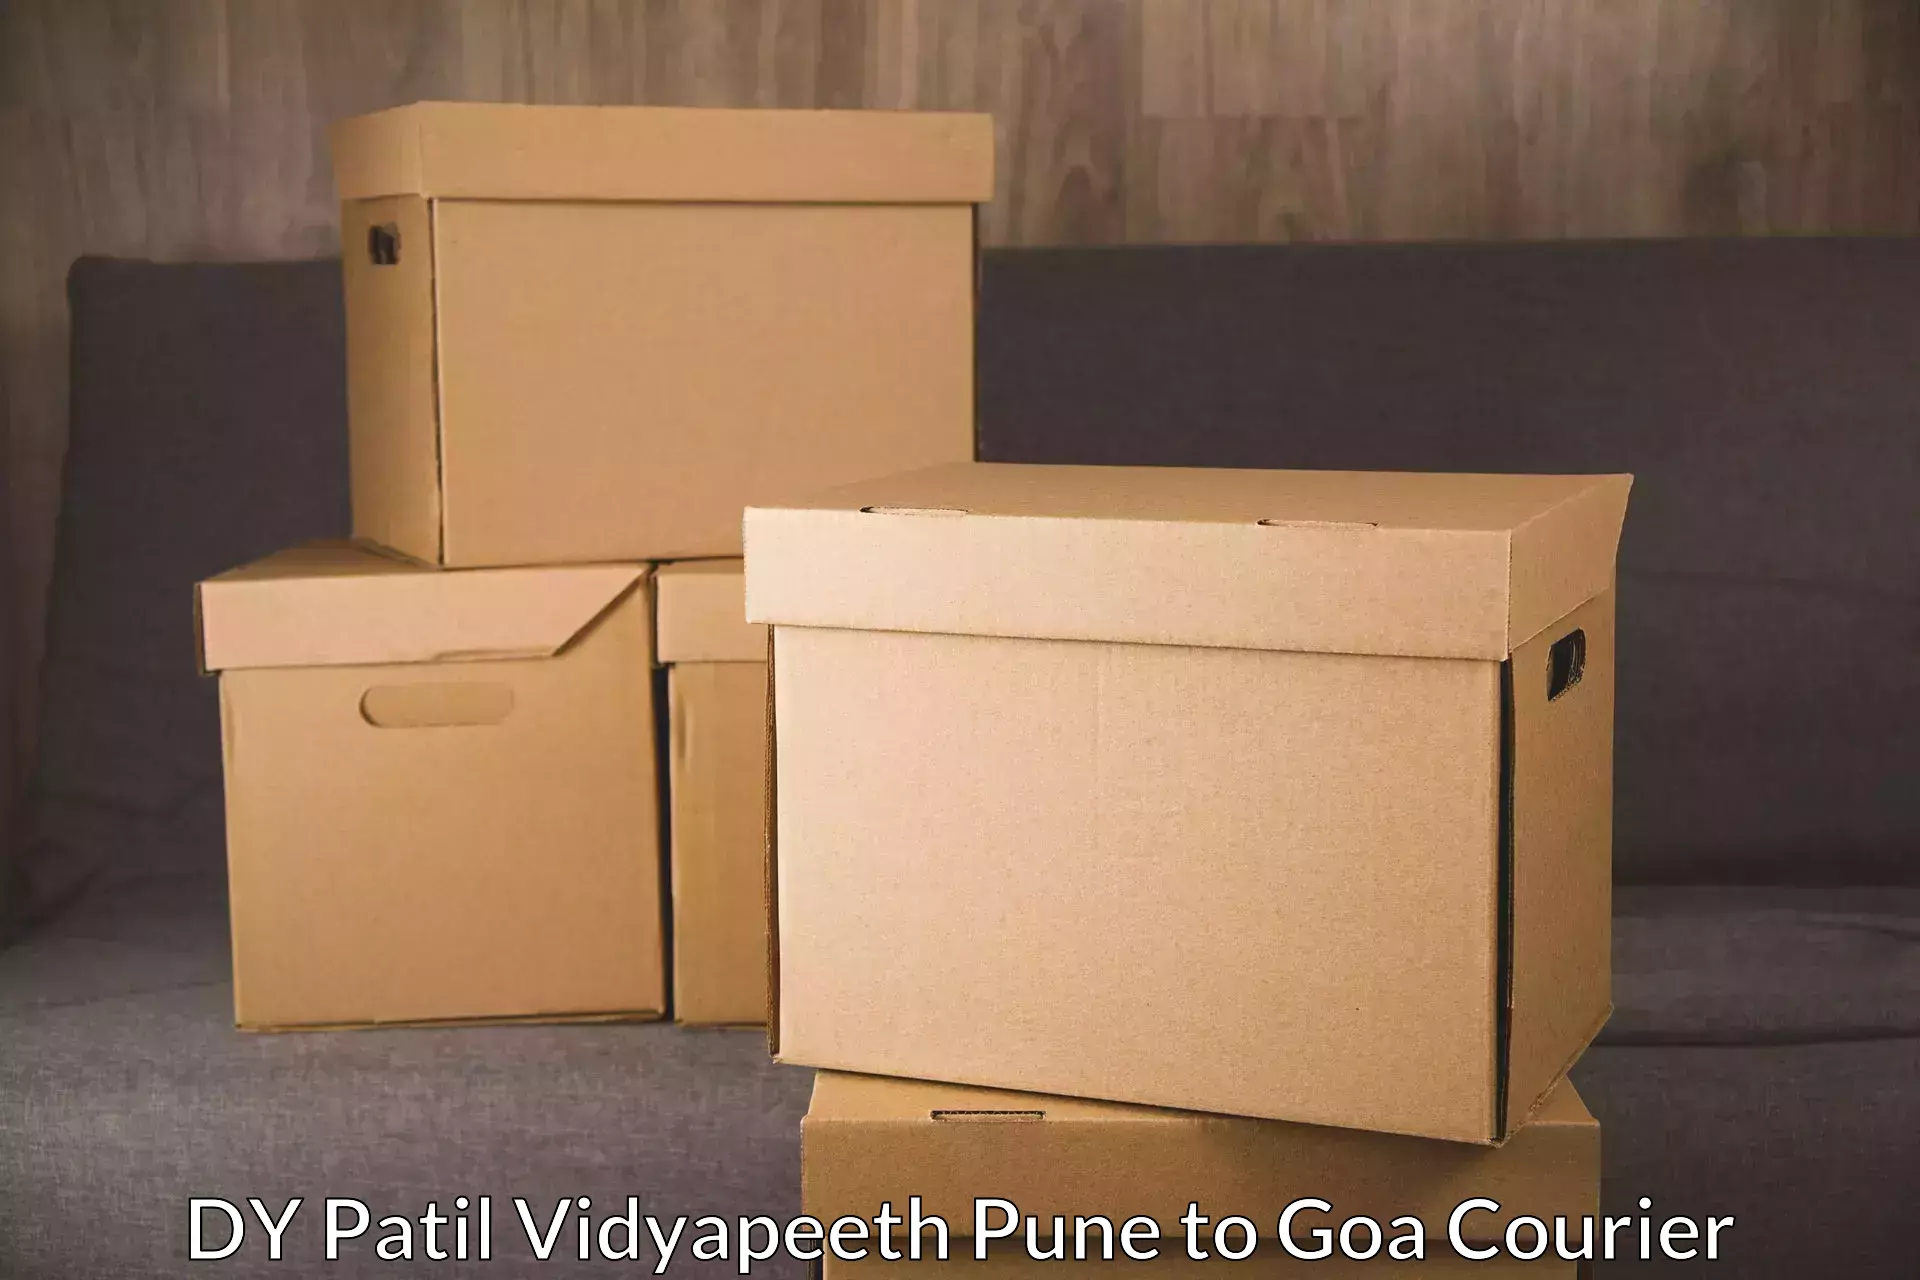 Cargo delivery service in DY Patil Vidyapeeth Pune to Goa